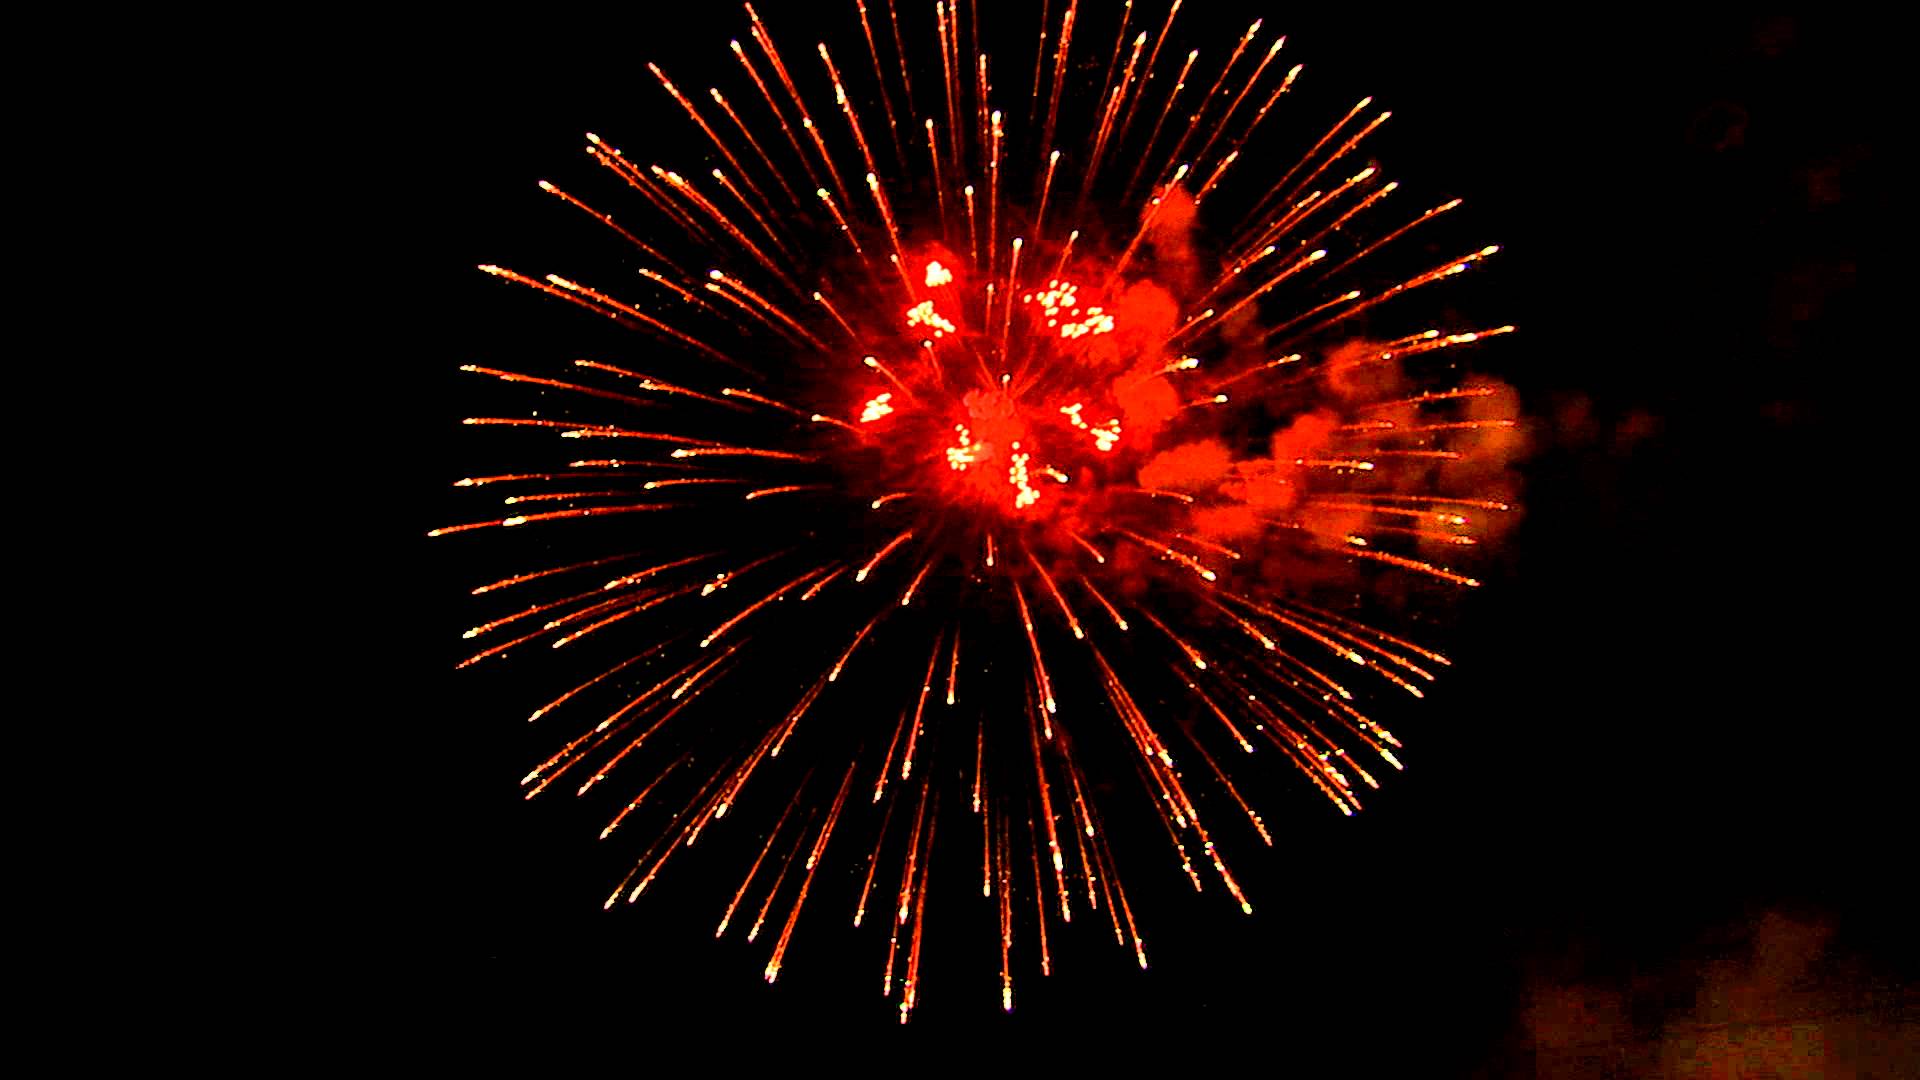 Royalty Free Stock Footage of Fireworks exploding in the night sky ...